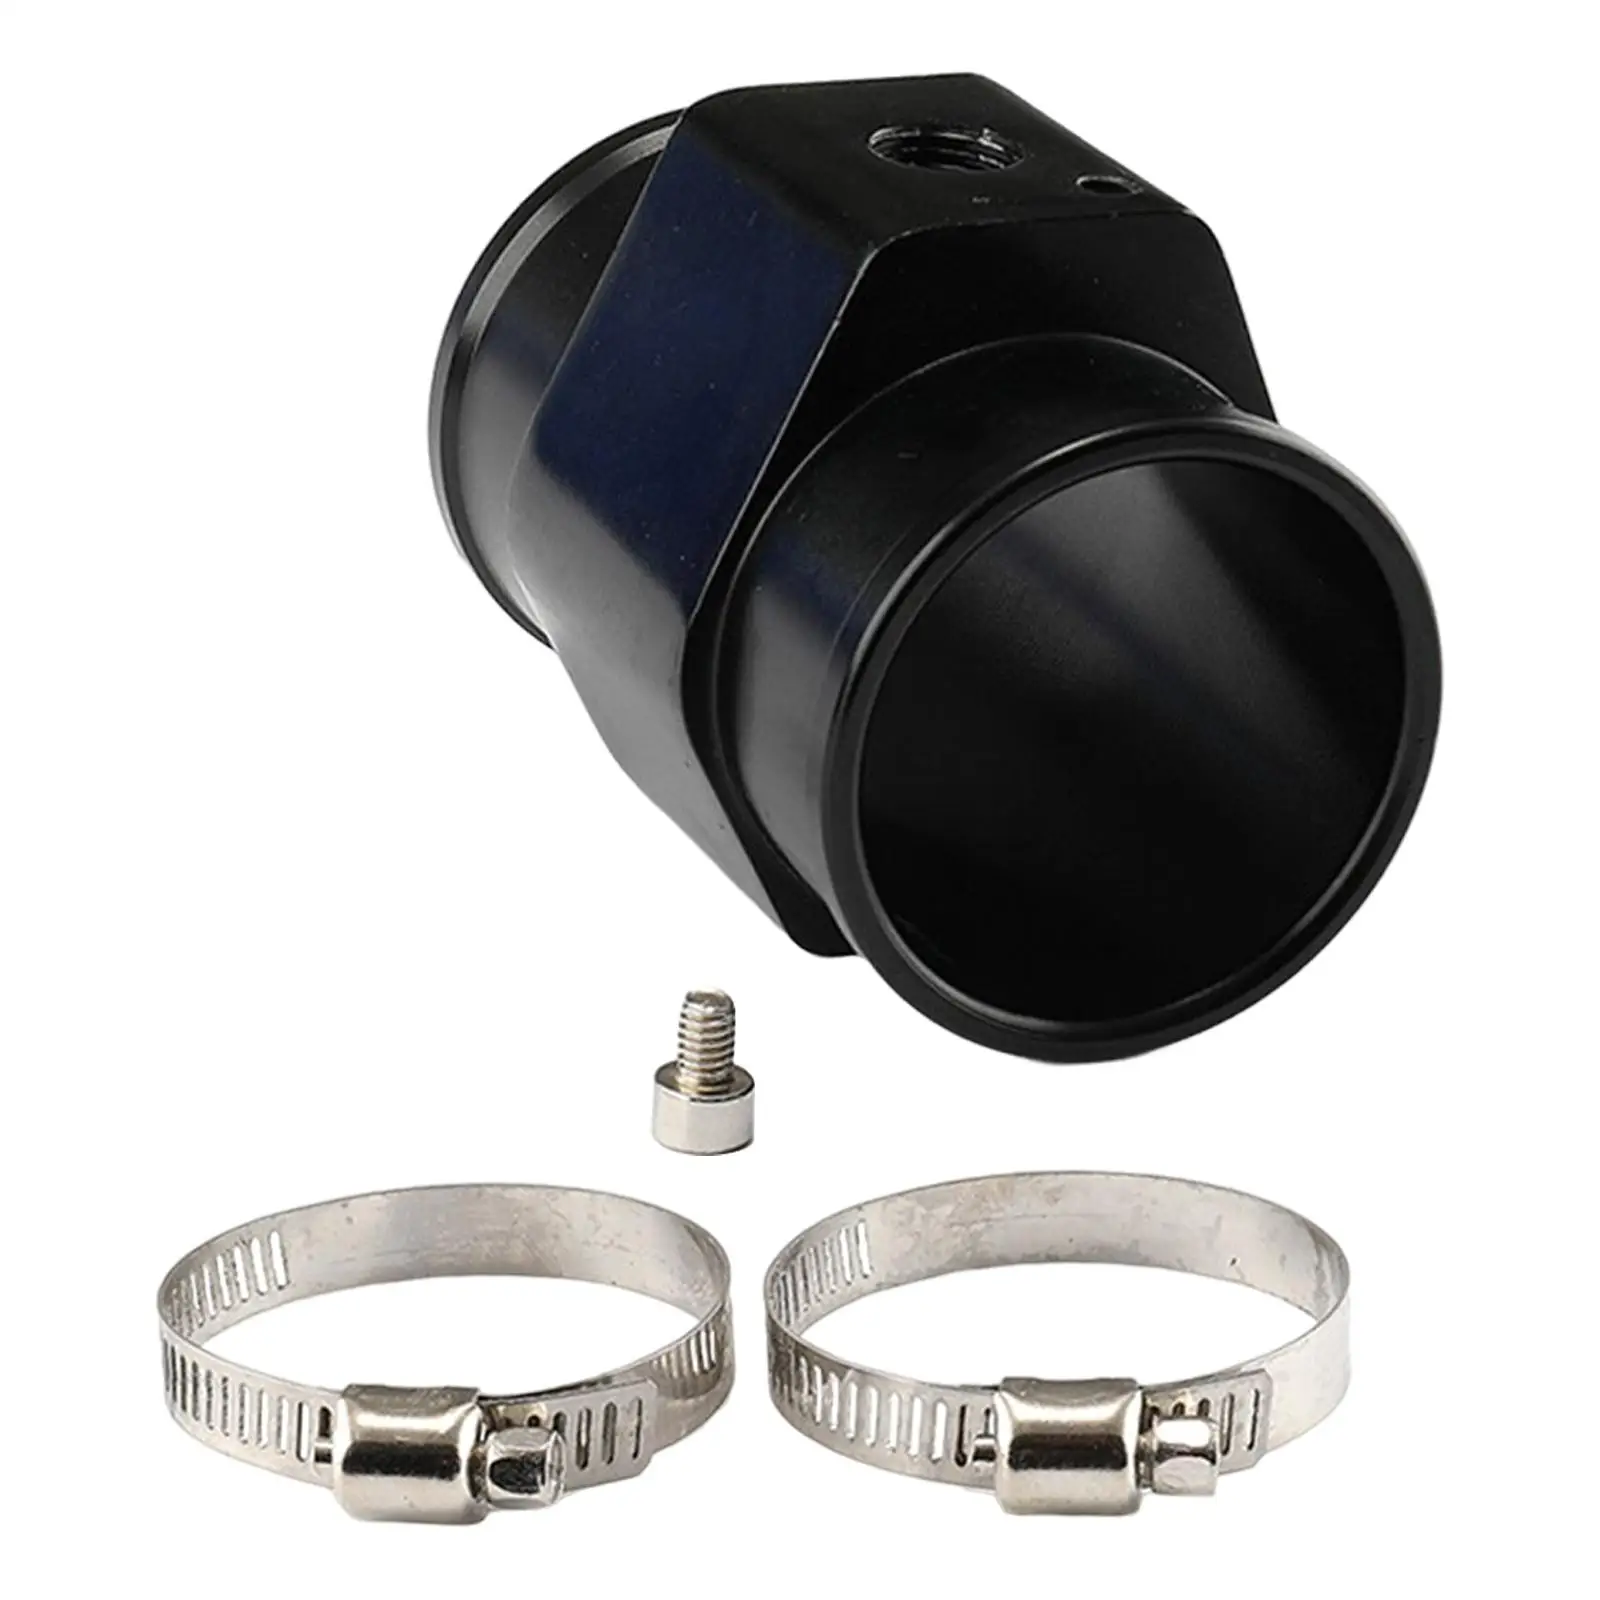 Universal Water Temp Meter Joint Pipe Aluminum 3 Way Coolant Attachment Connector Radiator Clamps